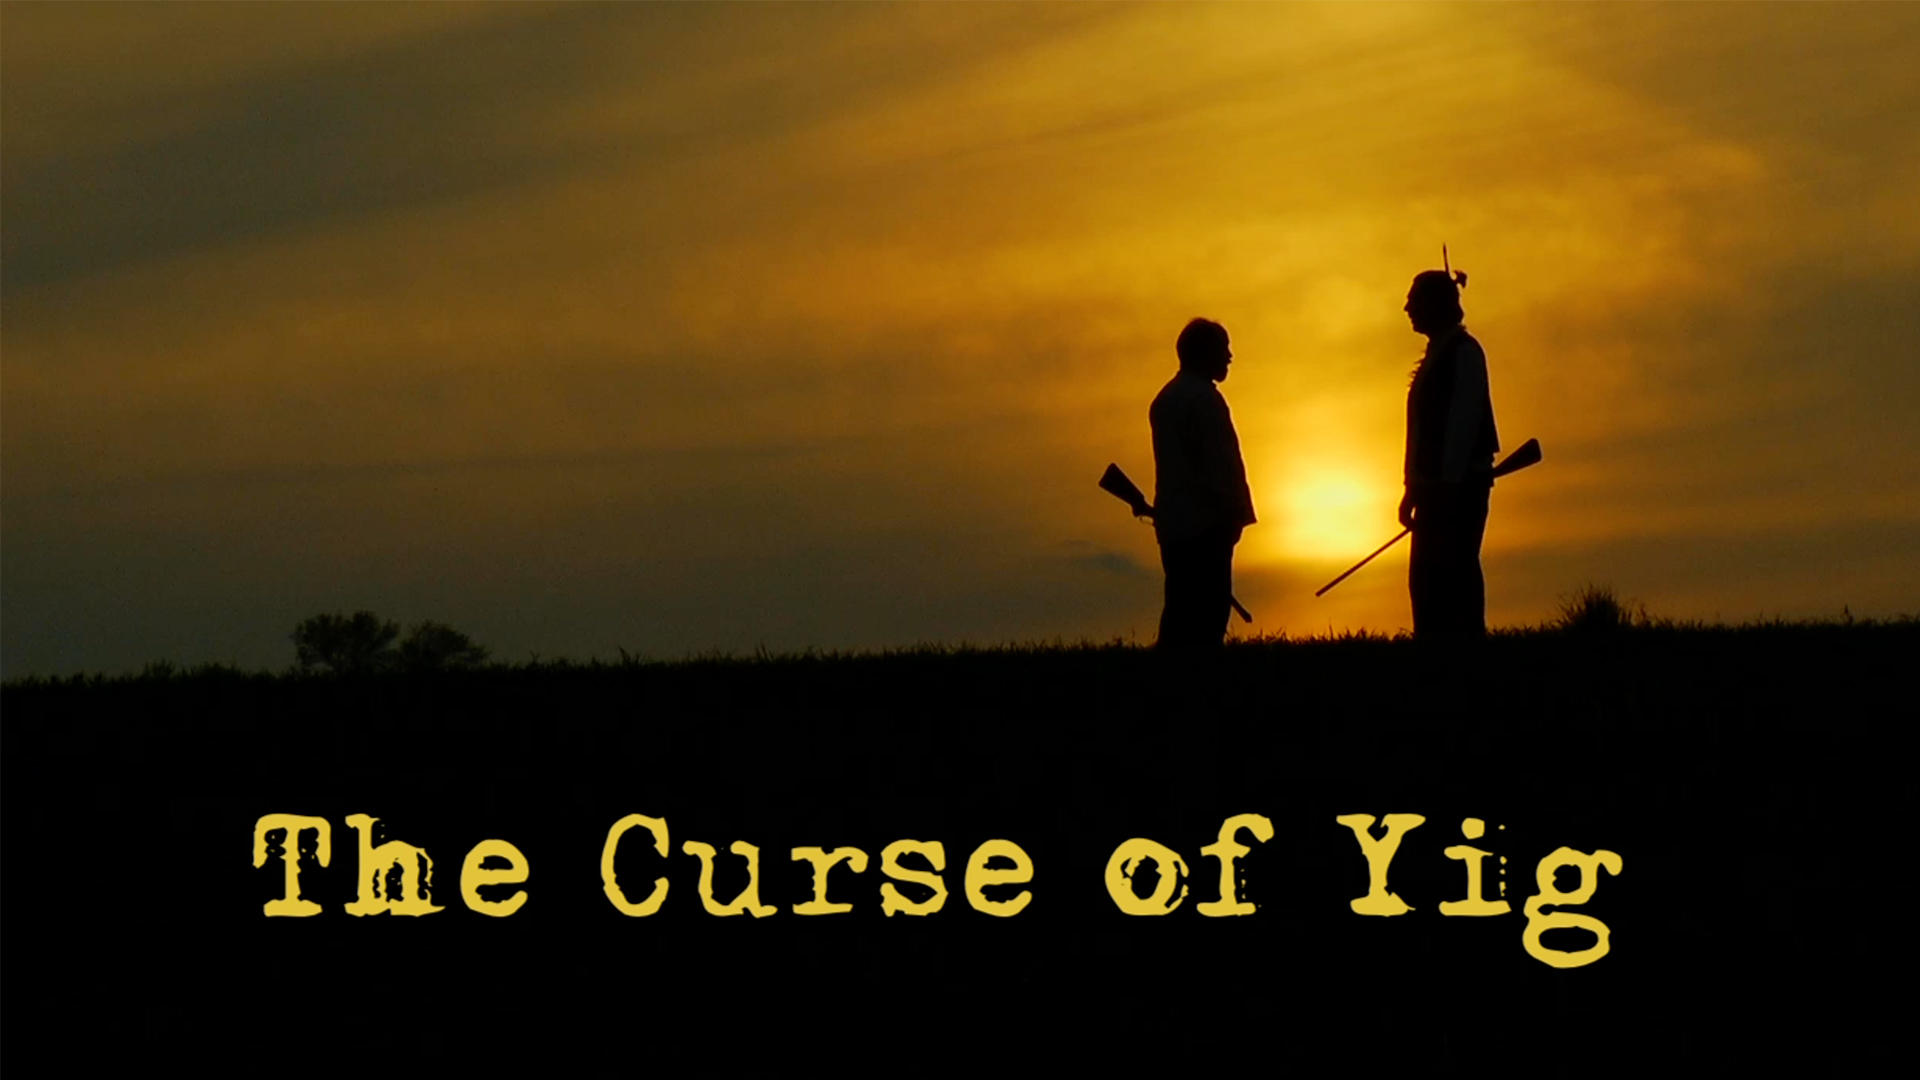 The Curse of Yig